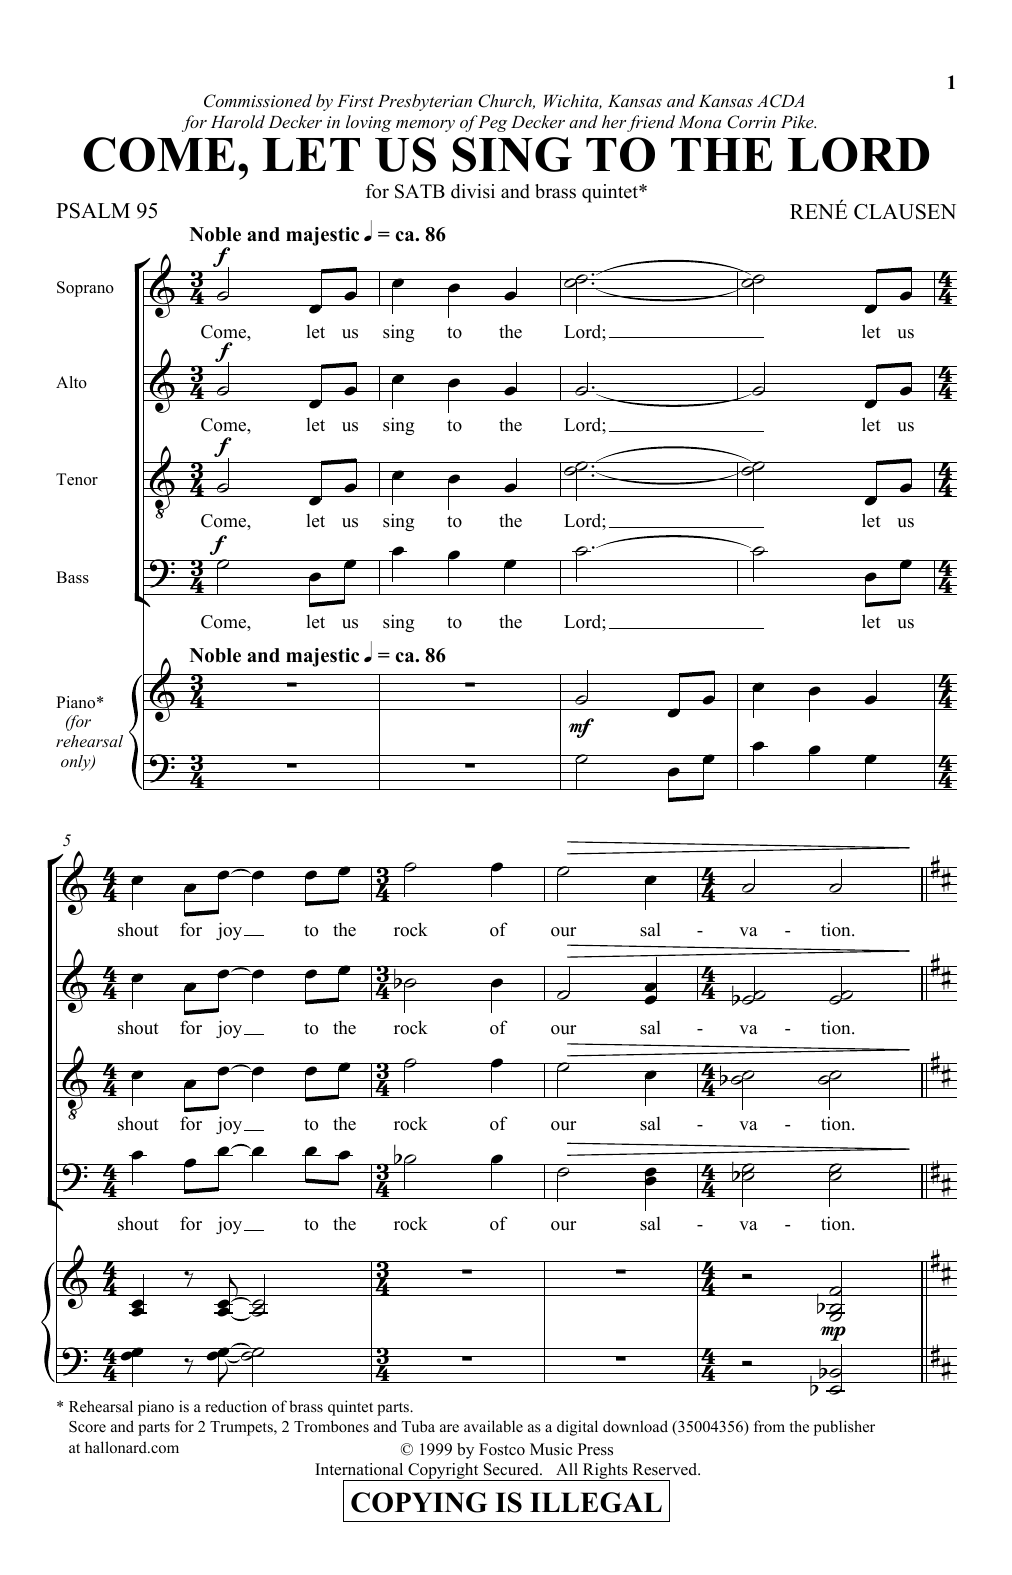 Download Rene Clausen Come, Let Us Sing To The Lord Sheet Music